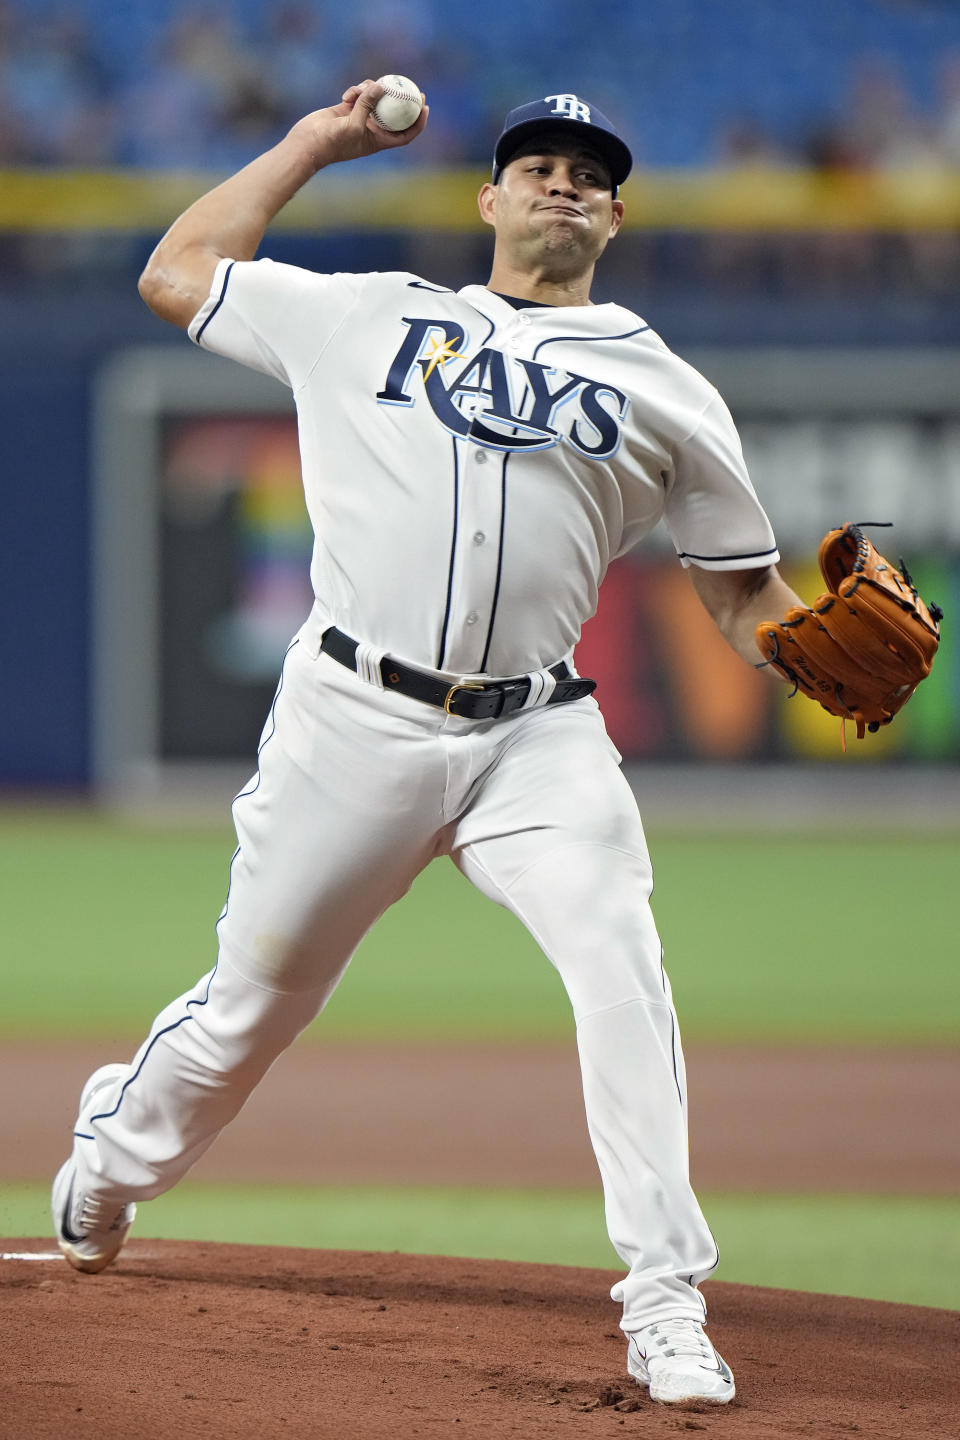 Tampa Bay Rays' Yonny Chirinos pitches to the Minnesota Twins during the first inning of a baseball game Thursday, June 8, 2023, in St. Petersburg, Fla. (AP Photo/Chris O'Meara)